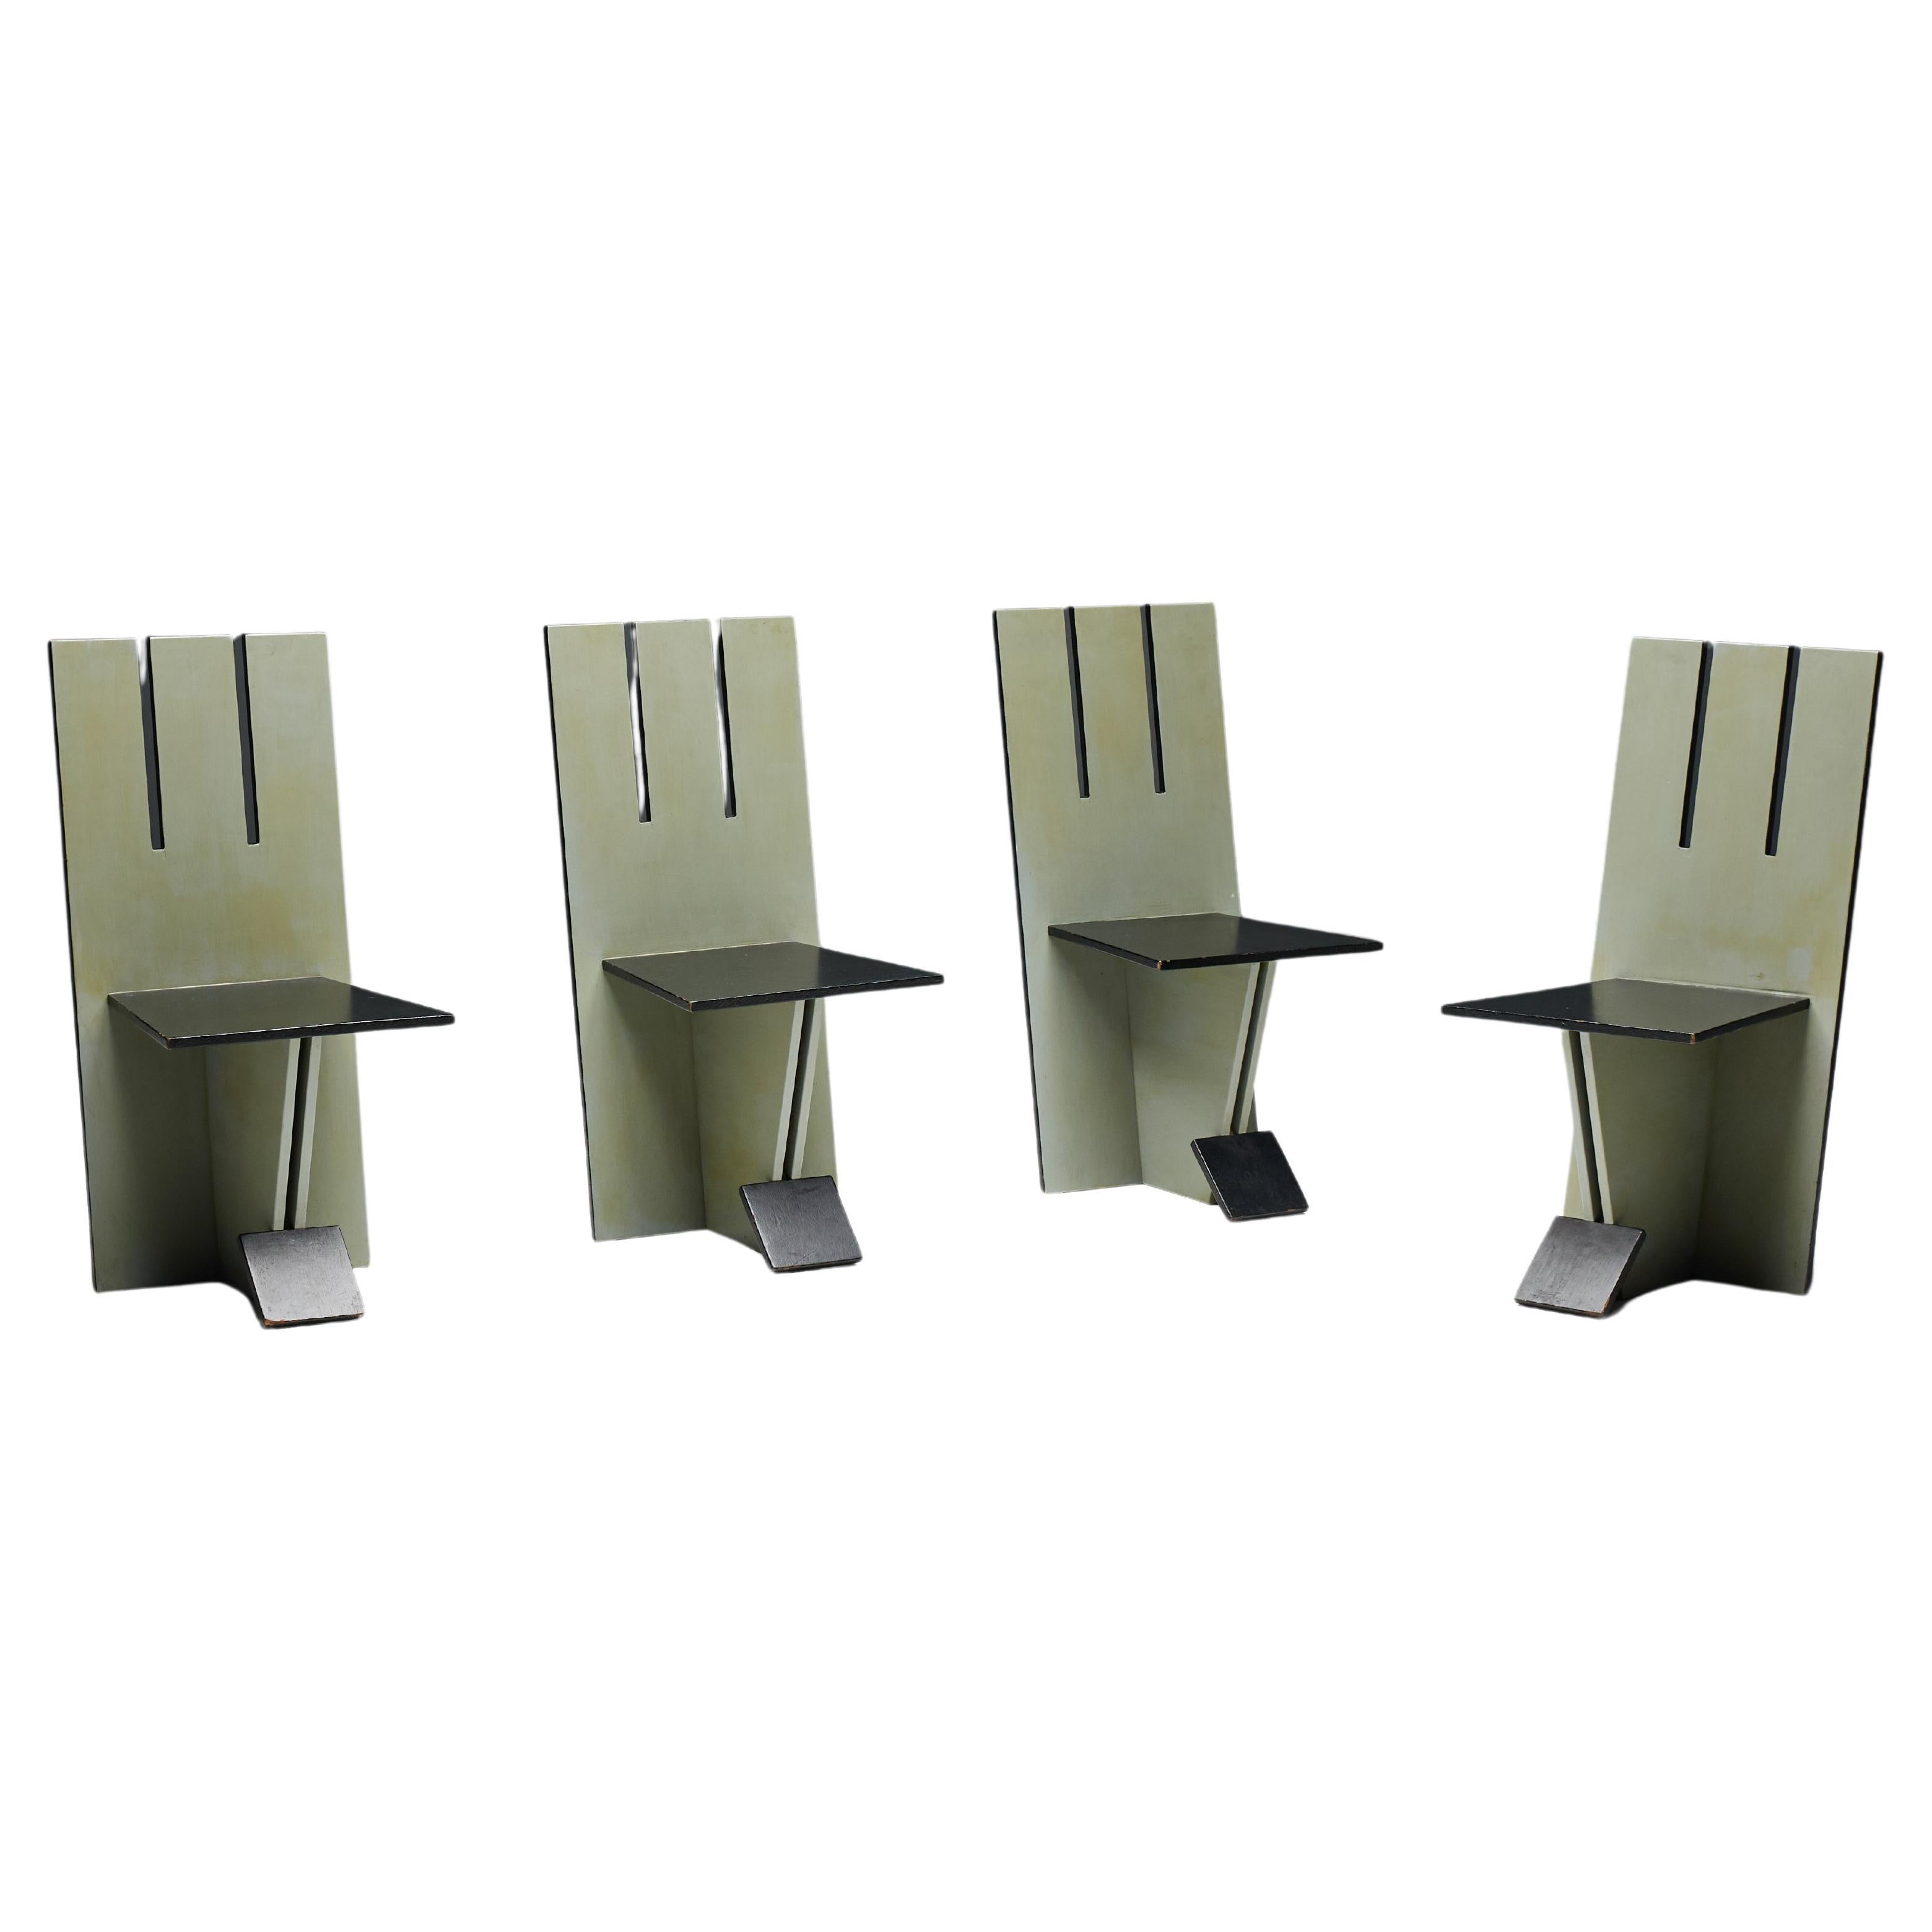 Dining Chairs in the style of De Stijl Movement, Netherlands, 1950s For Sale